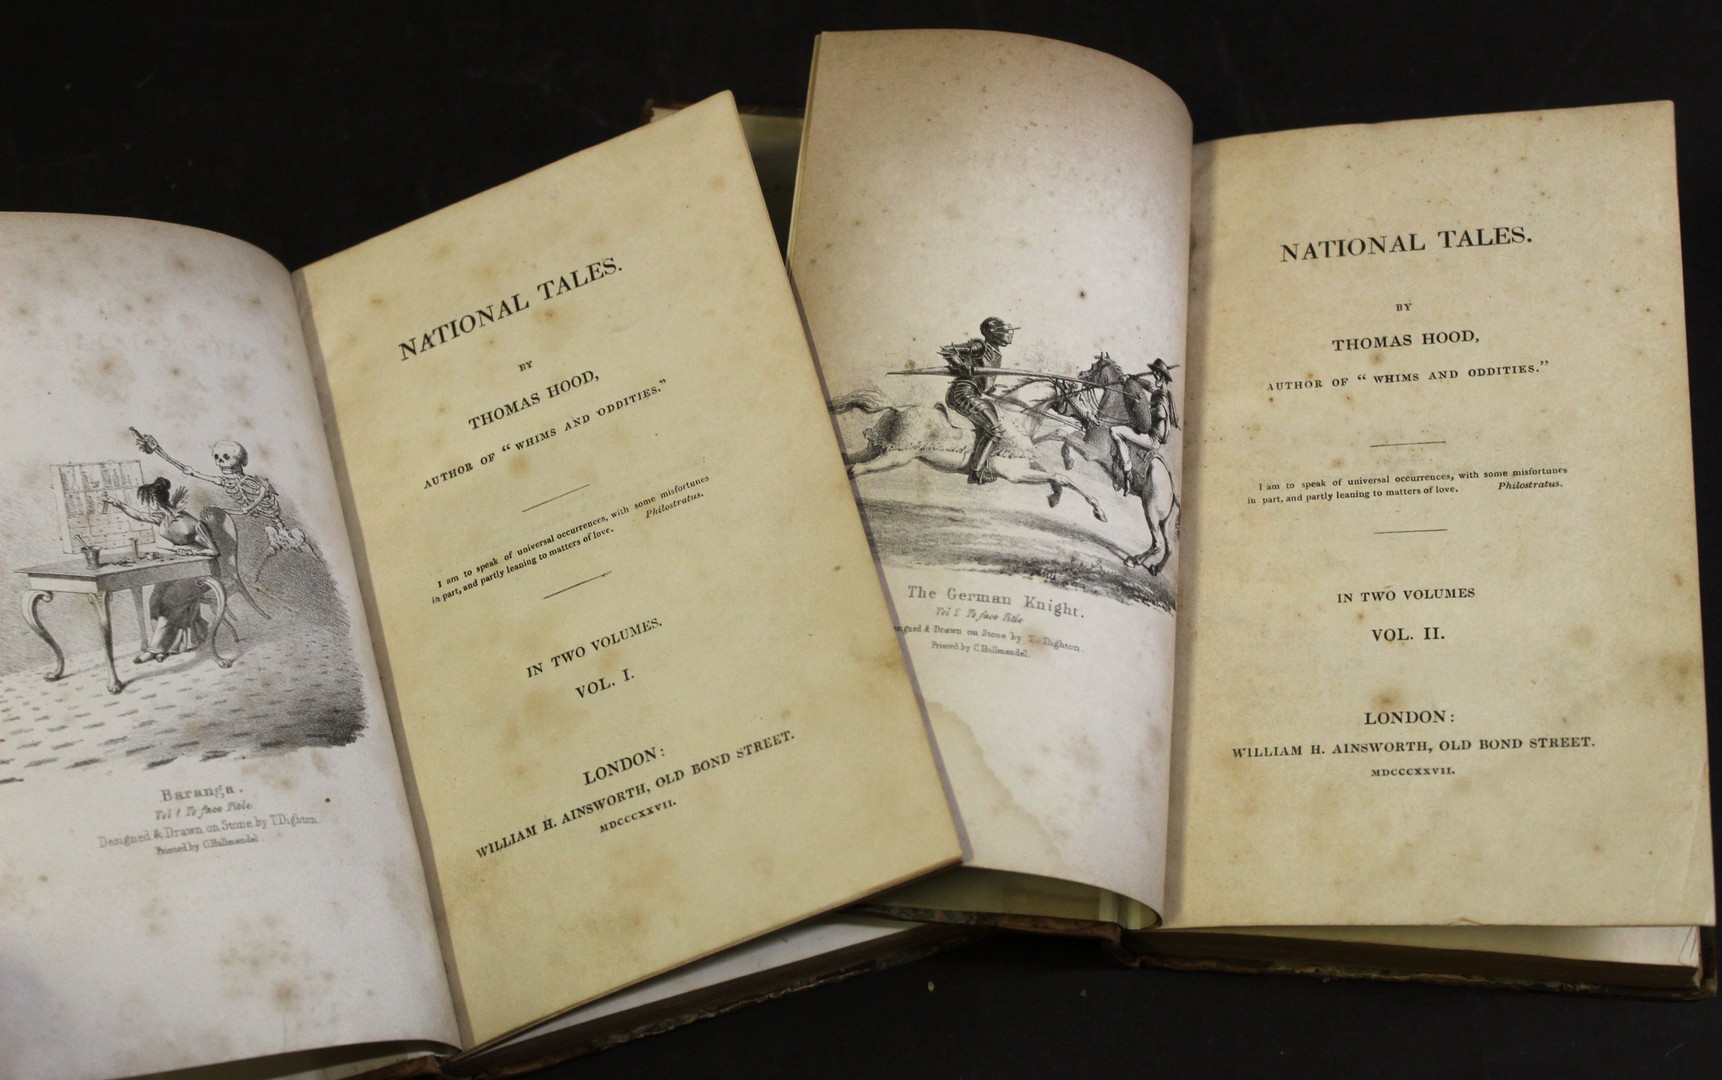 THOMAS HOOD: NATIONAL TALES, London, William H Ainsworth, 1827, 1st edition, 2 vols, 8 engraved